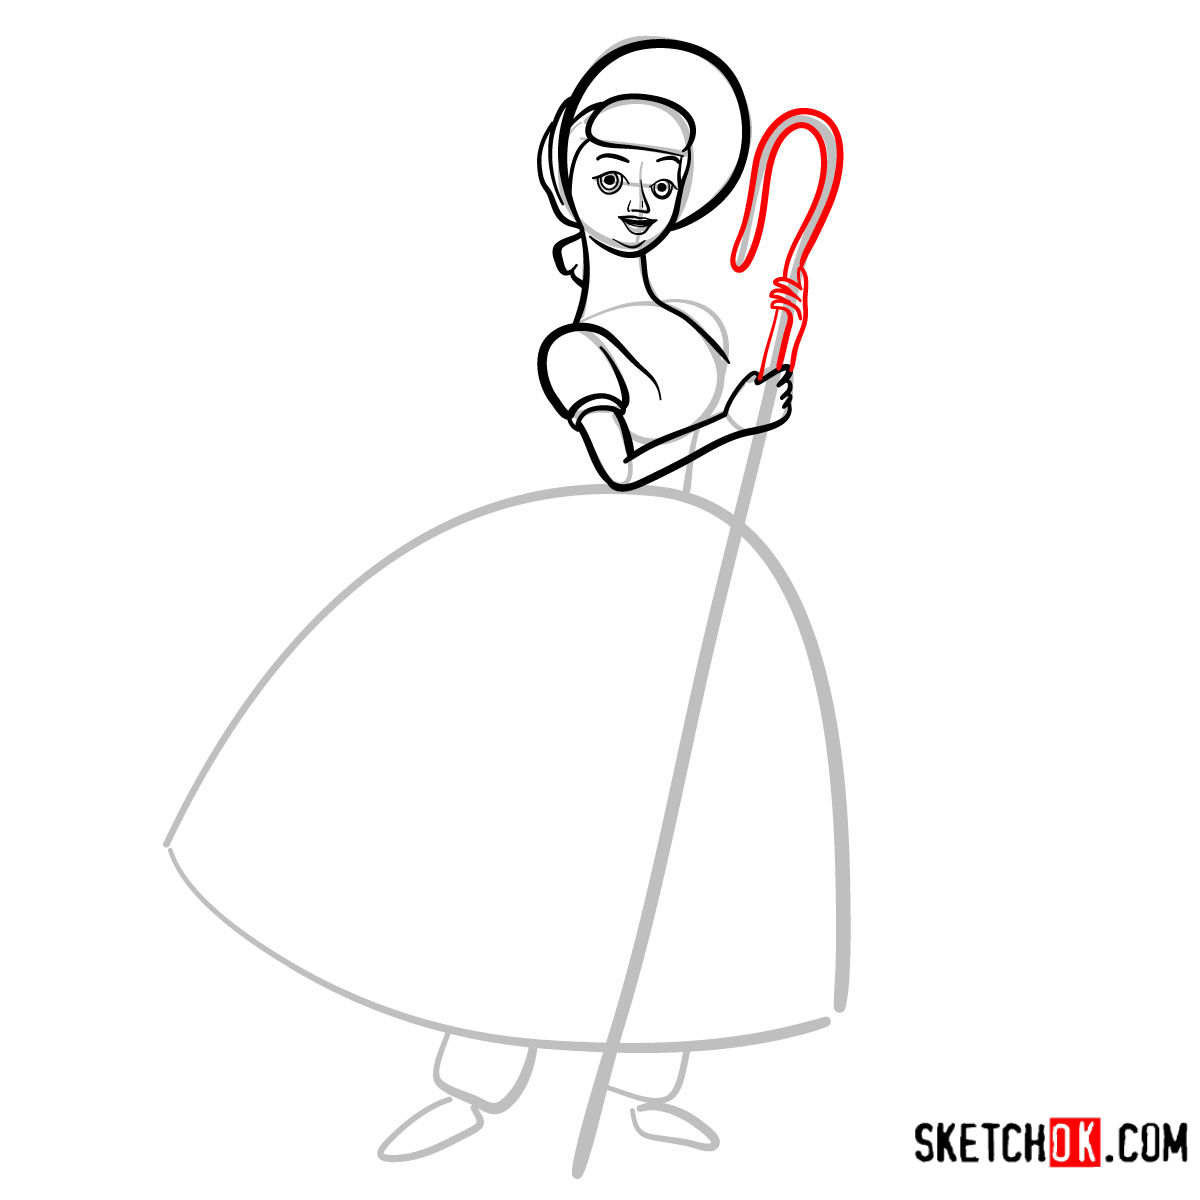 How to draw Bo Peep from Toy Story - step 07